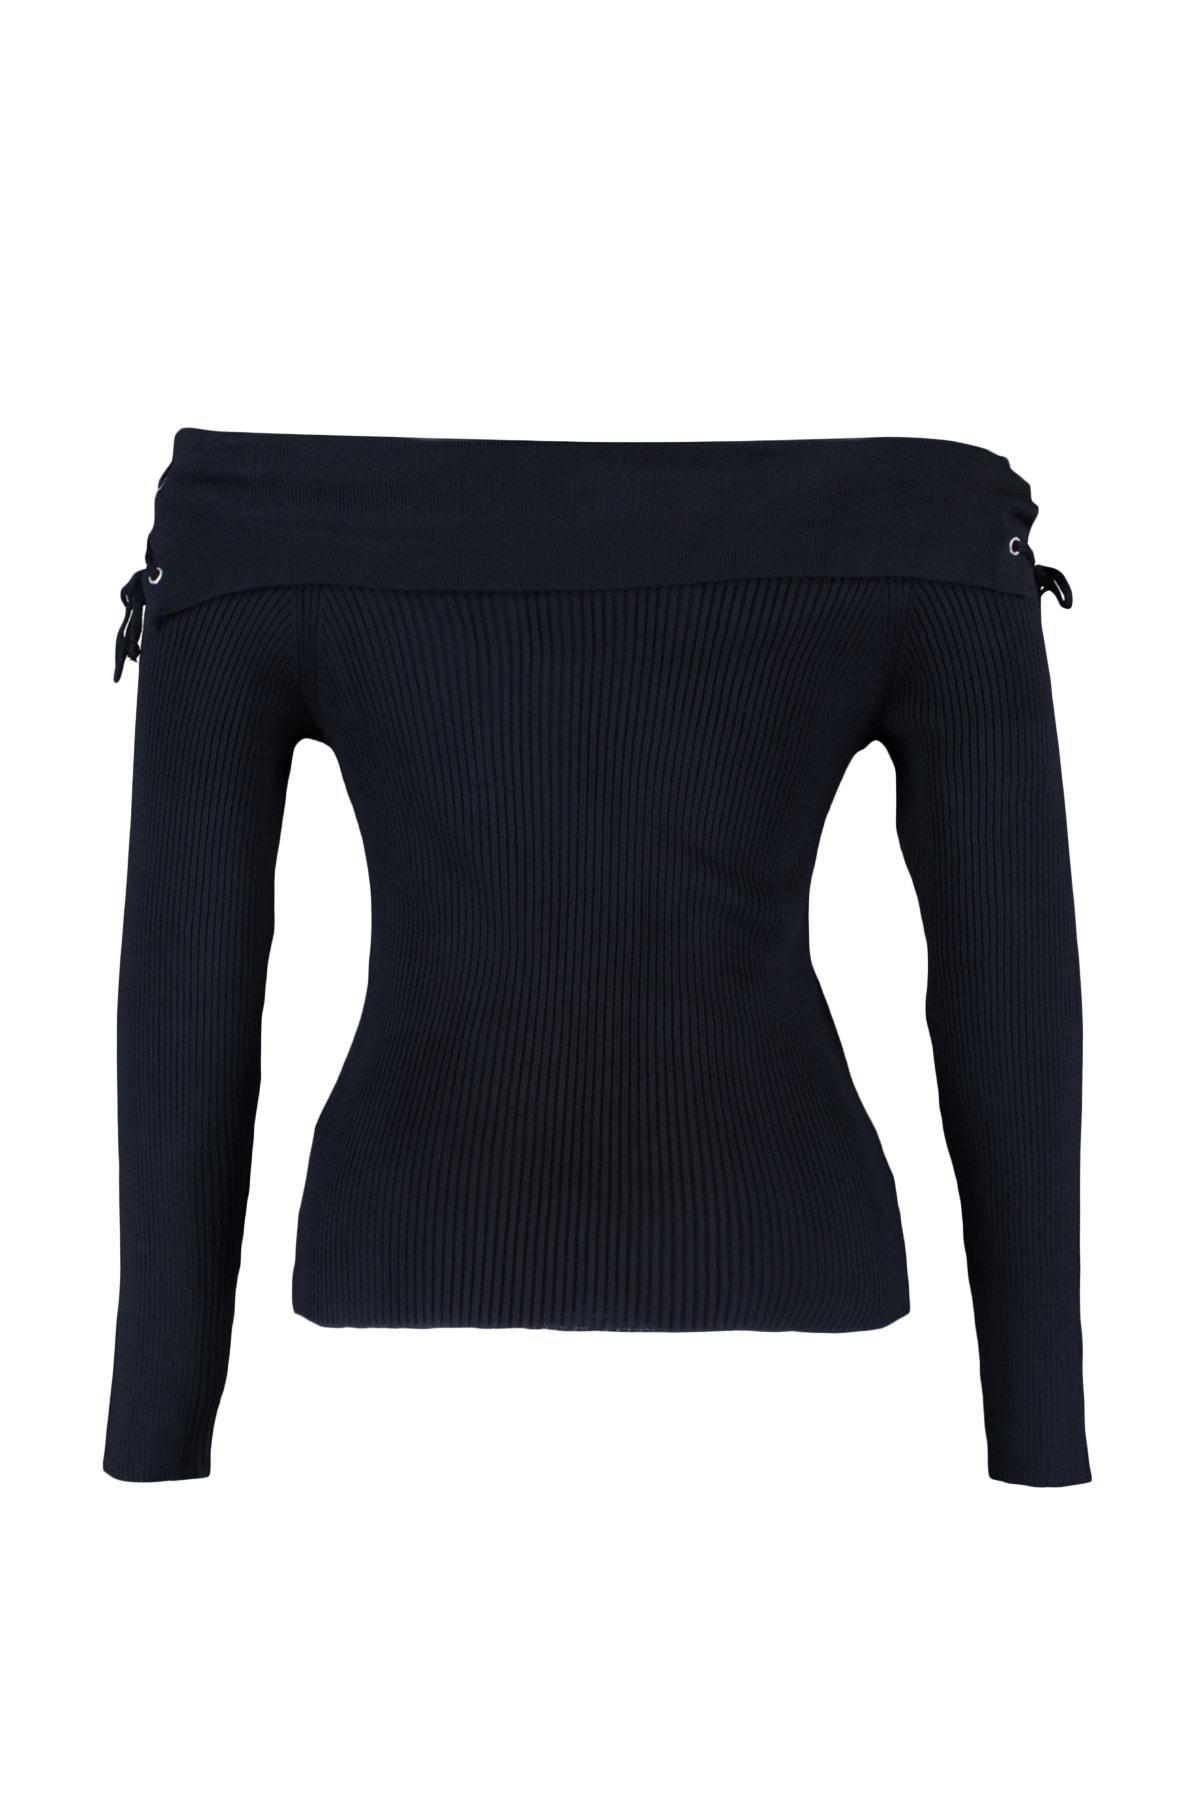 Trendyol - Black Fitted Plus Size Sweater